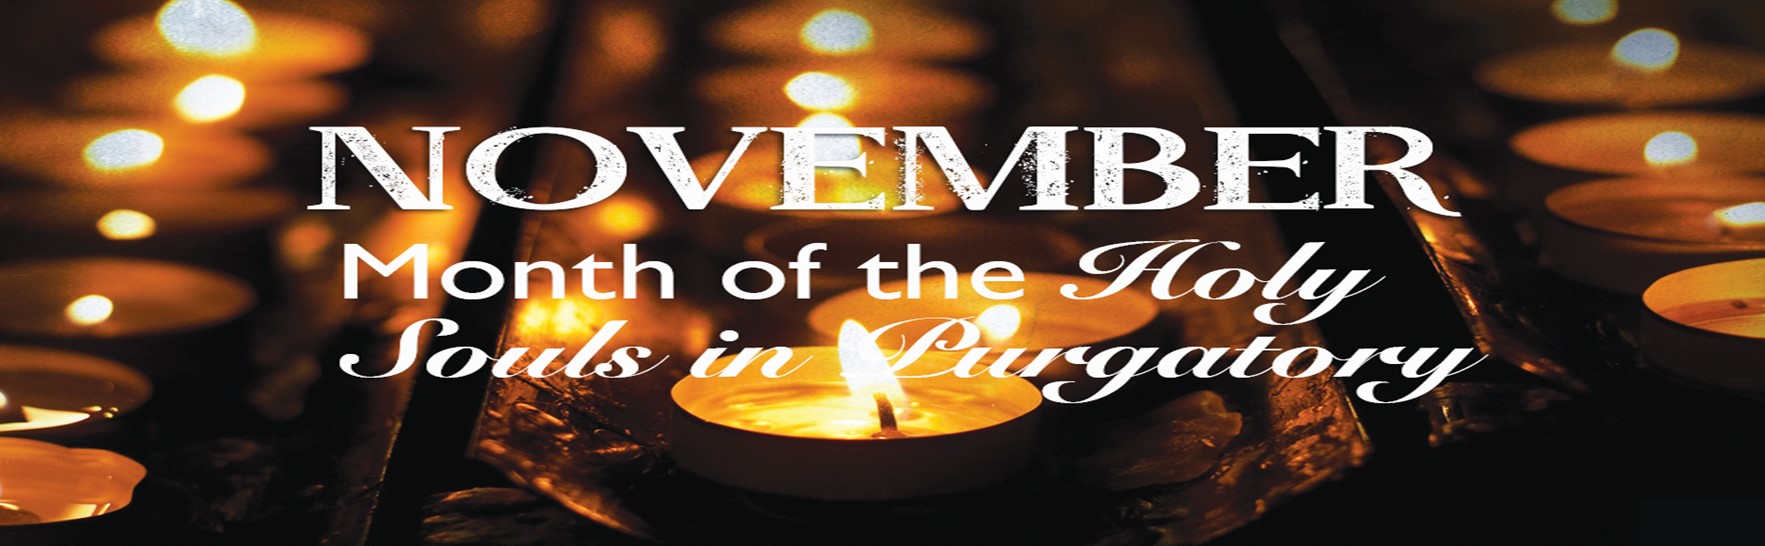 November - Month of the Holy Souls in Purgatory on Background of Lit Candles